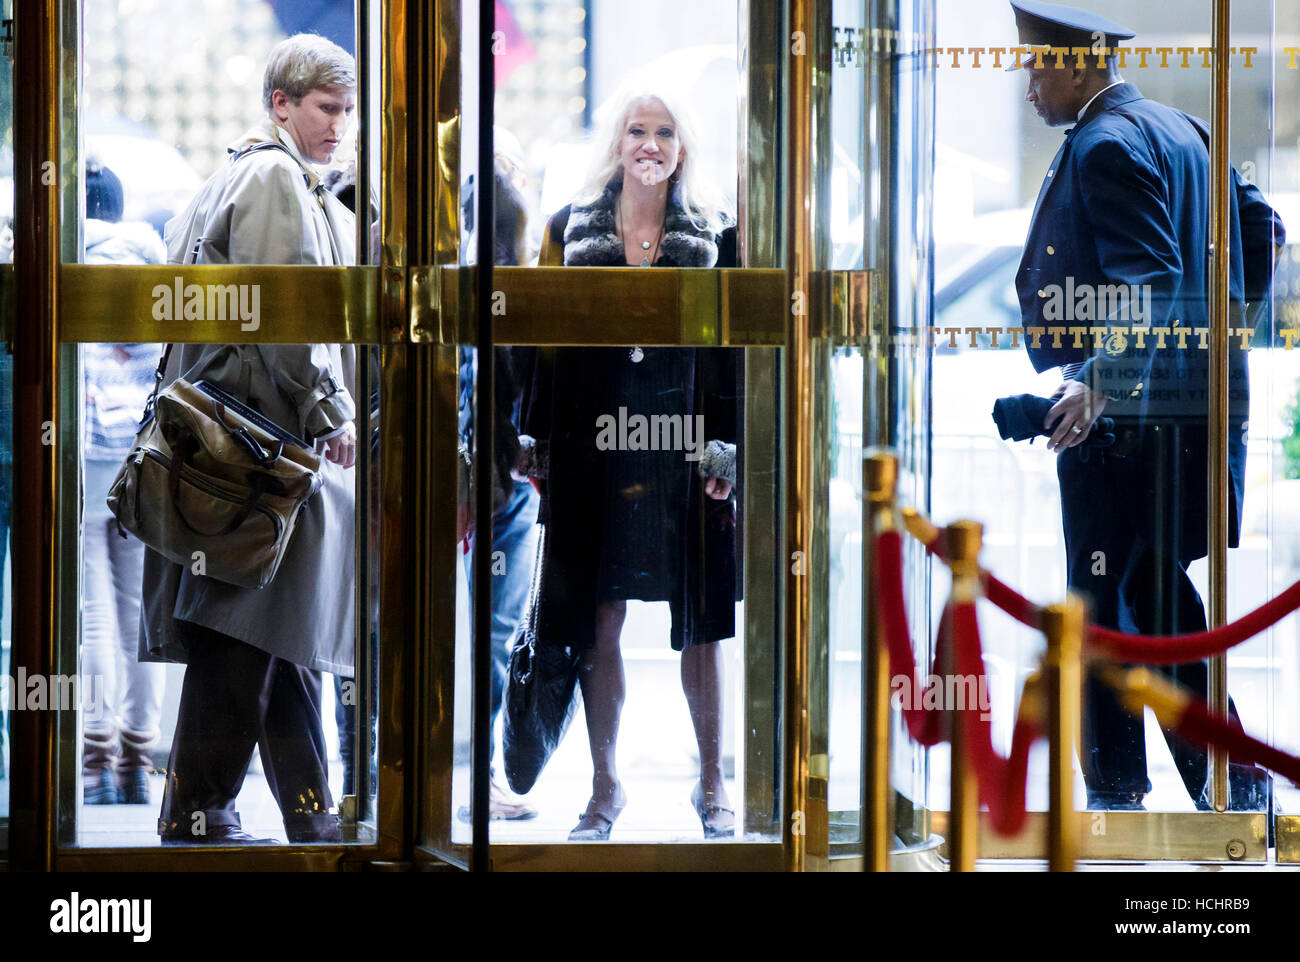 New York, New York, USA. 08th Dec, 2016. Kellyanne Conway (C), a Republican political strategist working with the transition team of President-elect Donald Trump, arrives at Trump Tower in New York, New York, USA, 08 December 2016. Credit: Justin Lane/Pool via CNP - NO WIRE SERVICE - Photo: John Taggart/Consolidated/dpa/Alamy Live News Stock Photo